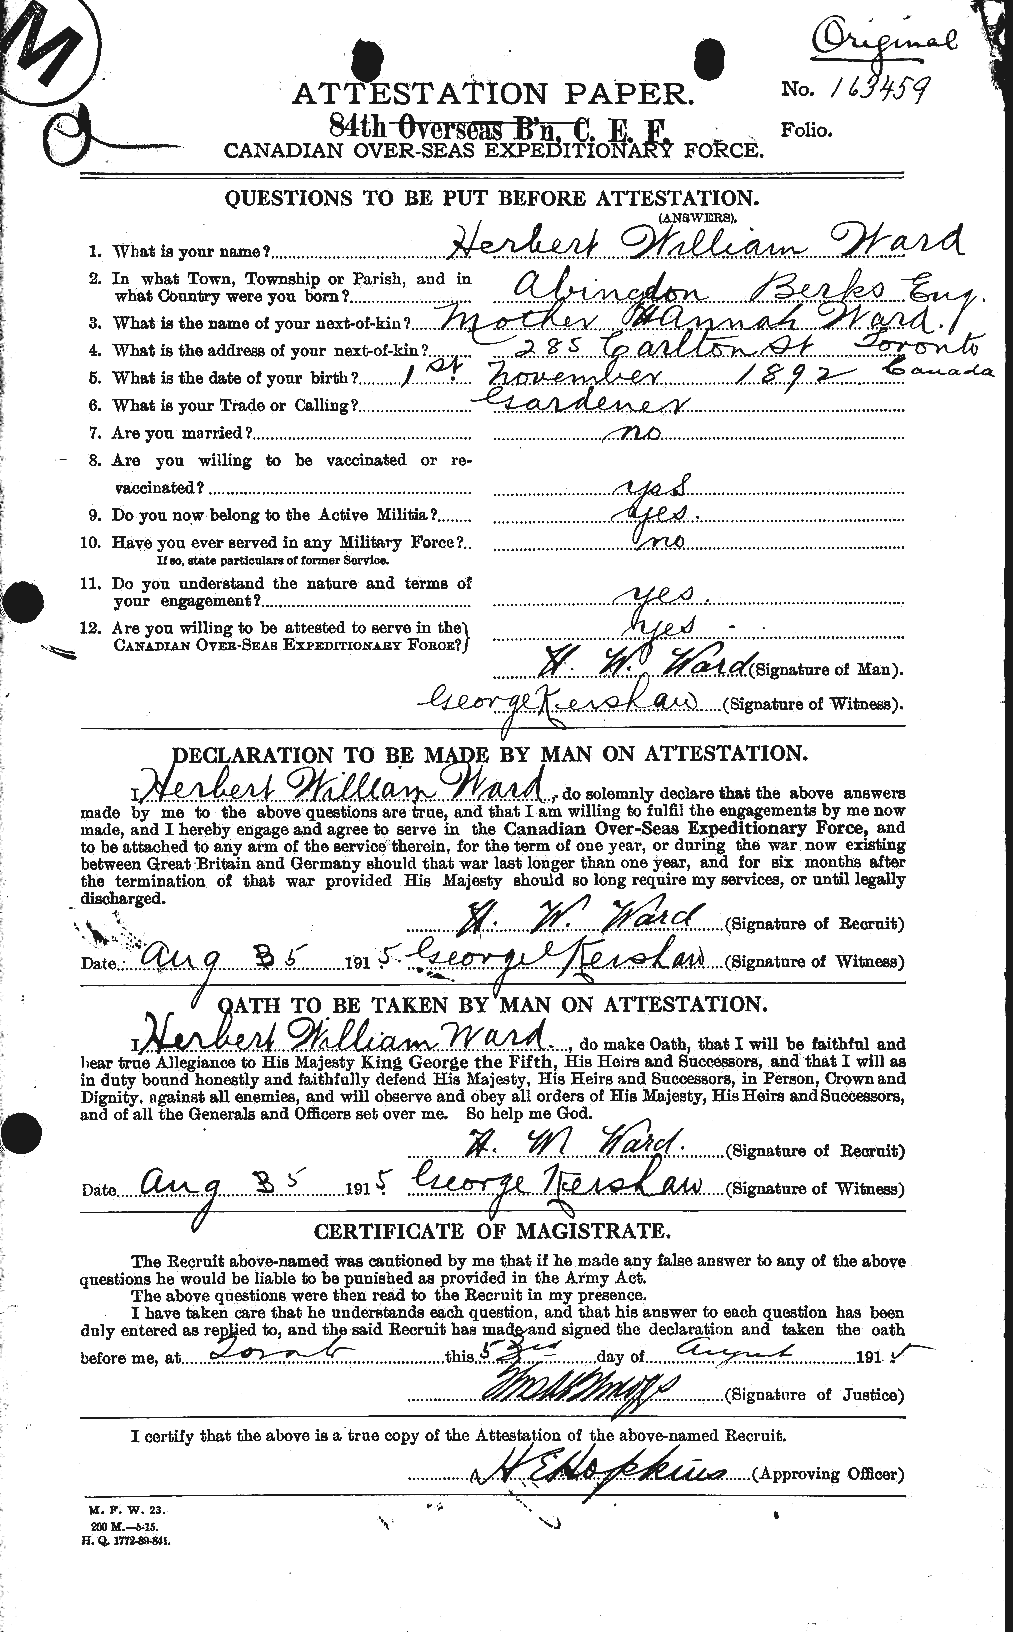 Personnel Records of the First World War - CEF 657858a